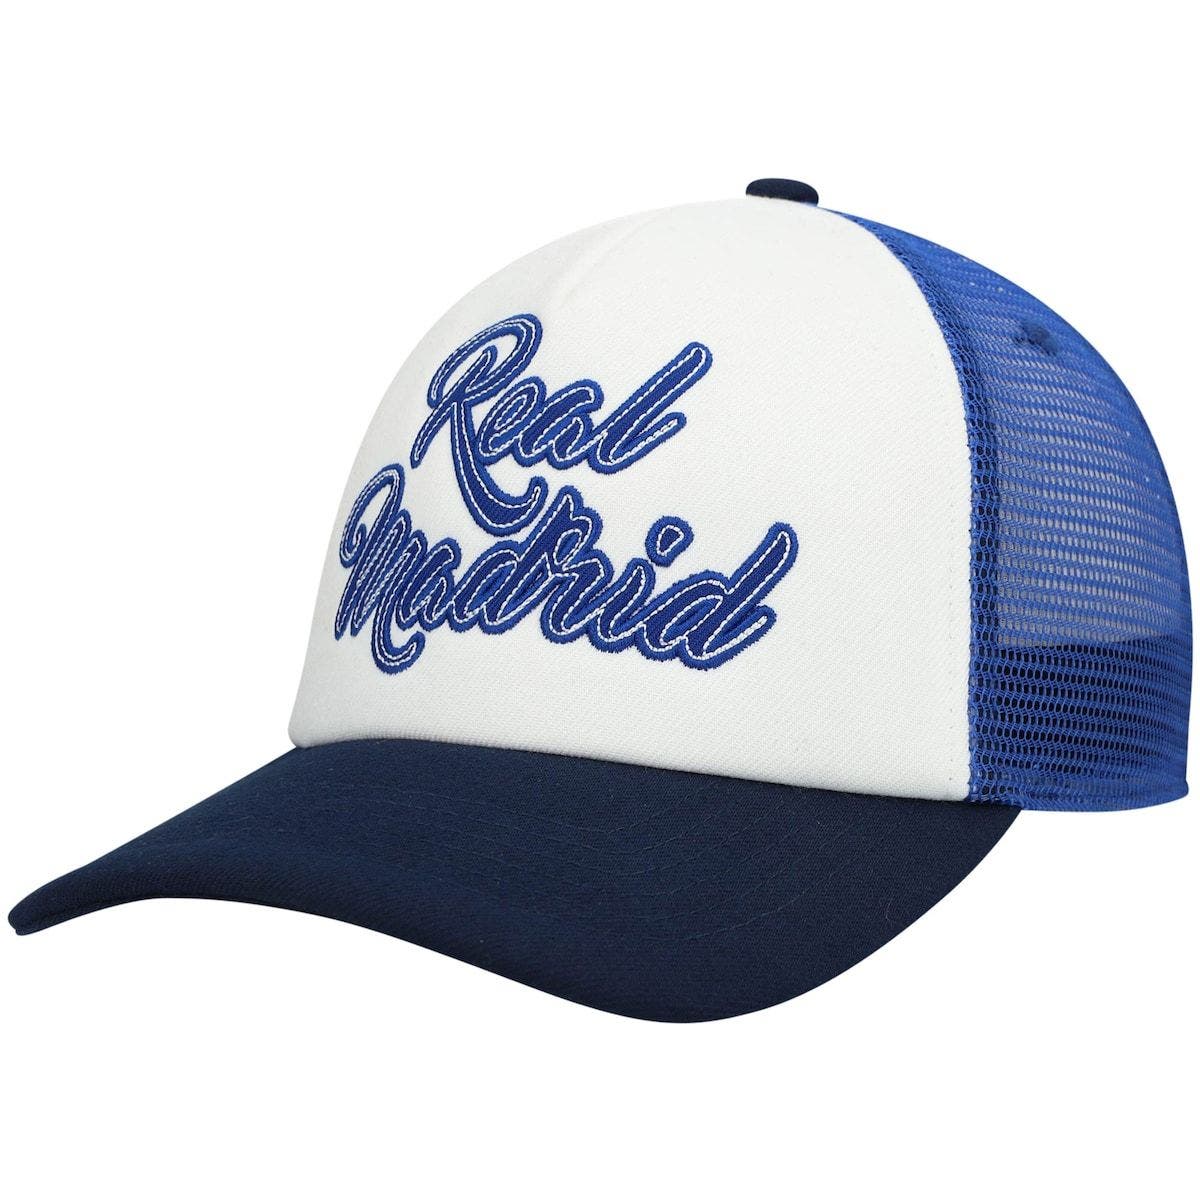 Fan Ink Real Madrid Limited Edition 'Stop Script' Adjustable Snapback Trucker Style Hat/Cap Blue/White 